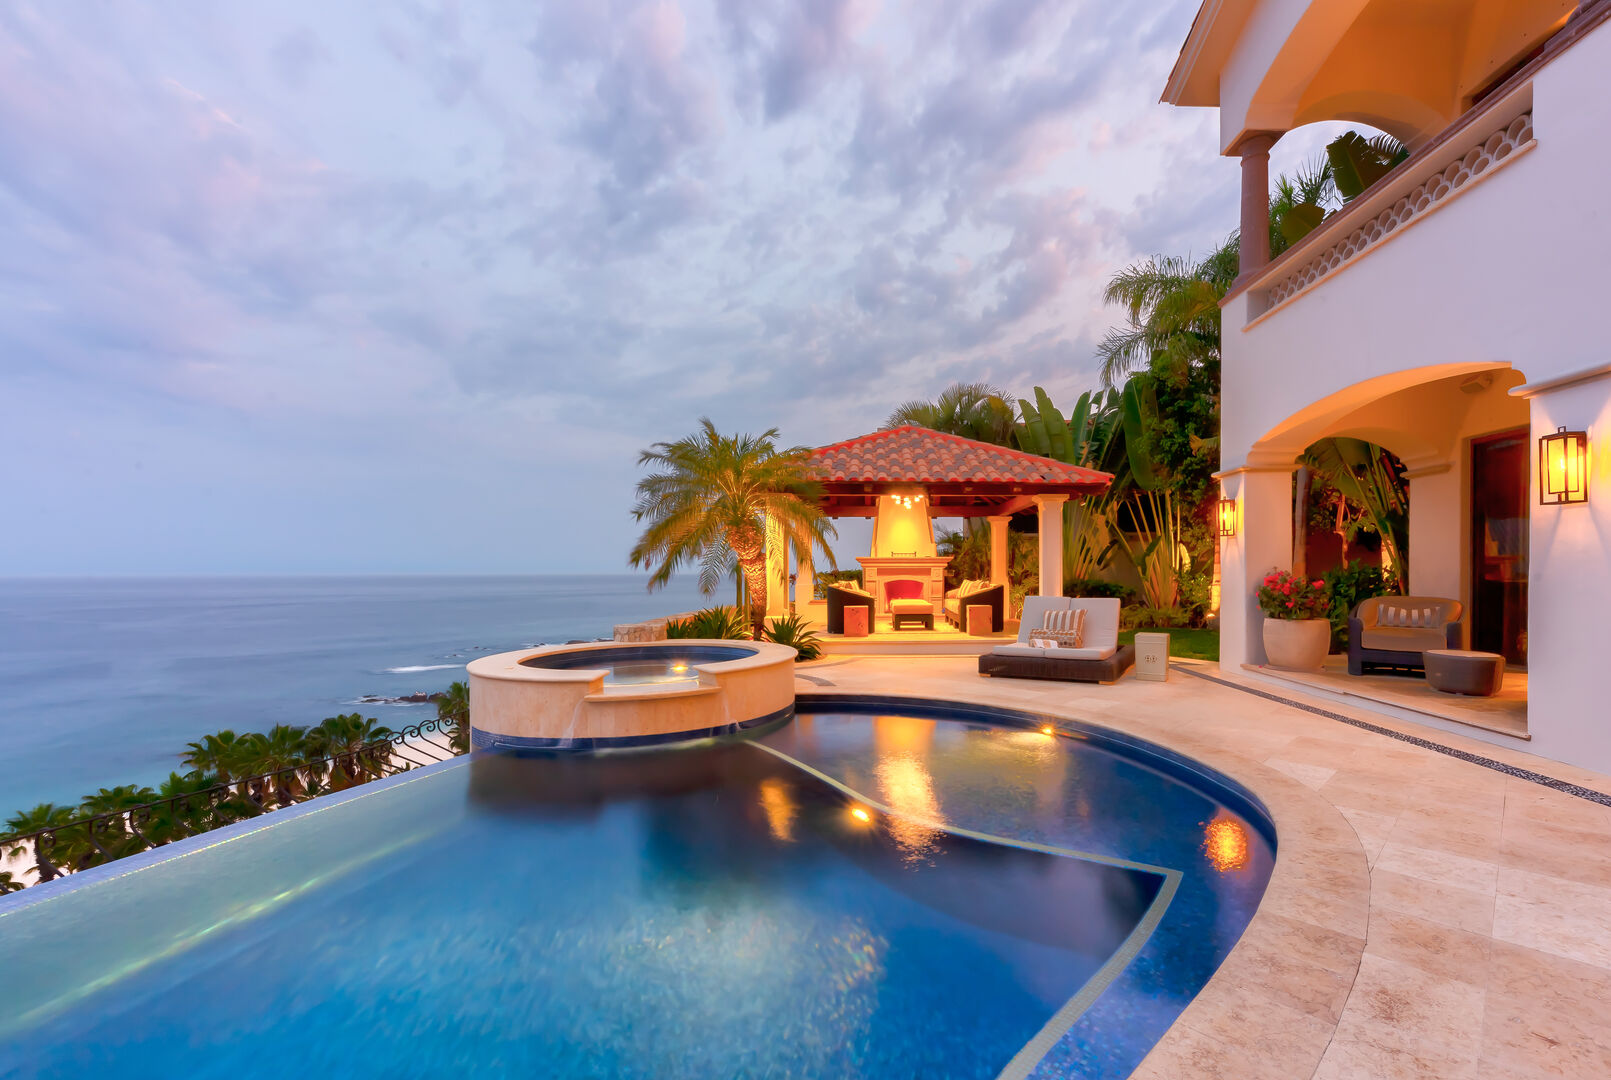 The infinity pool with an ocean view at Hacienda 502